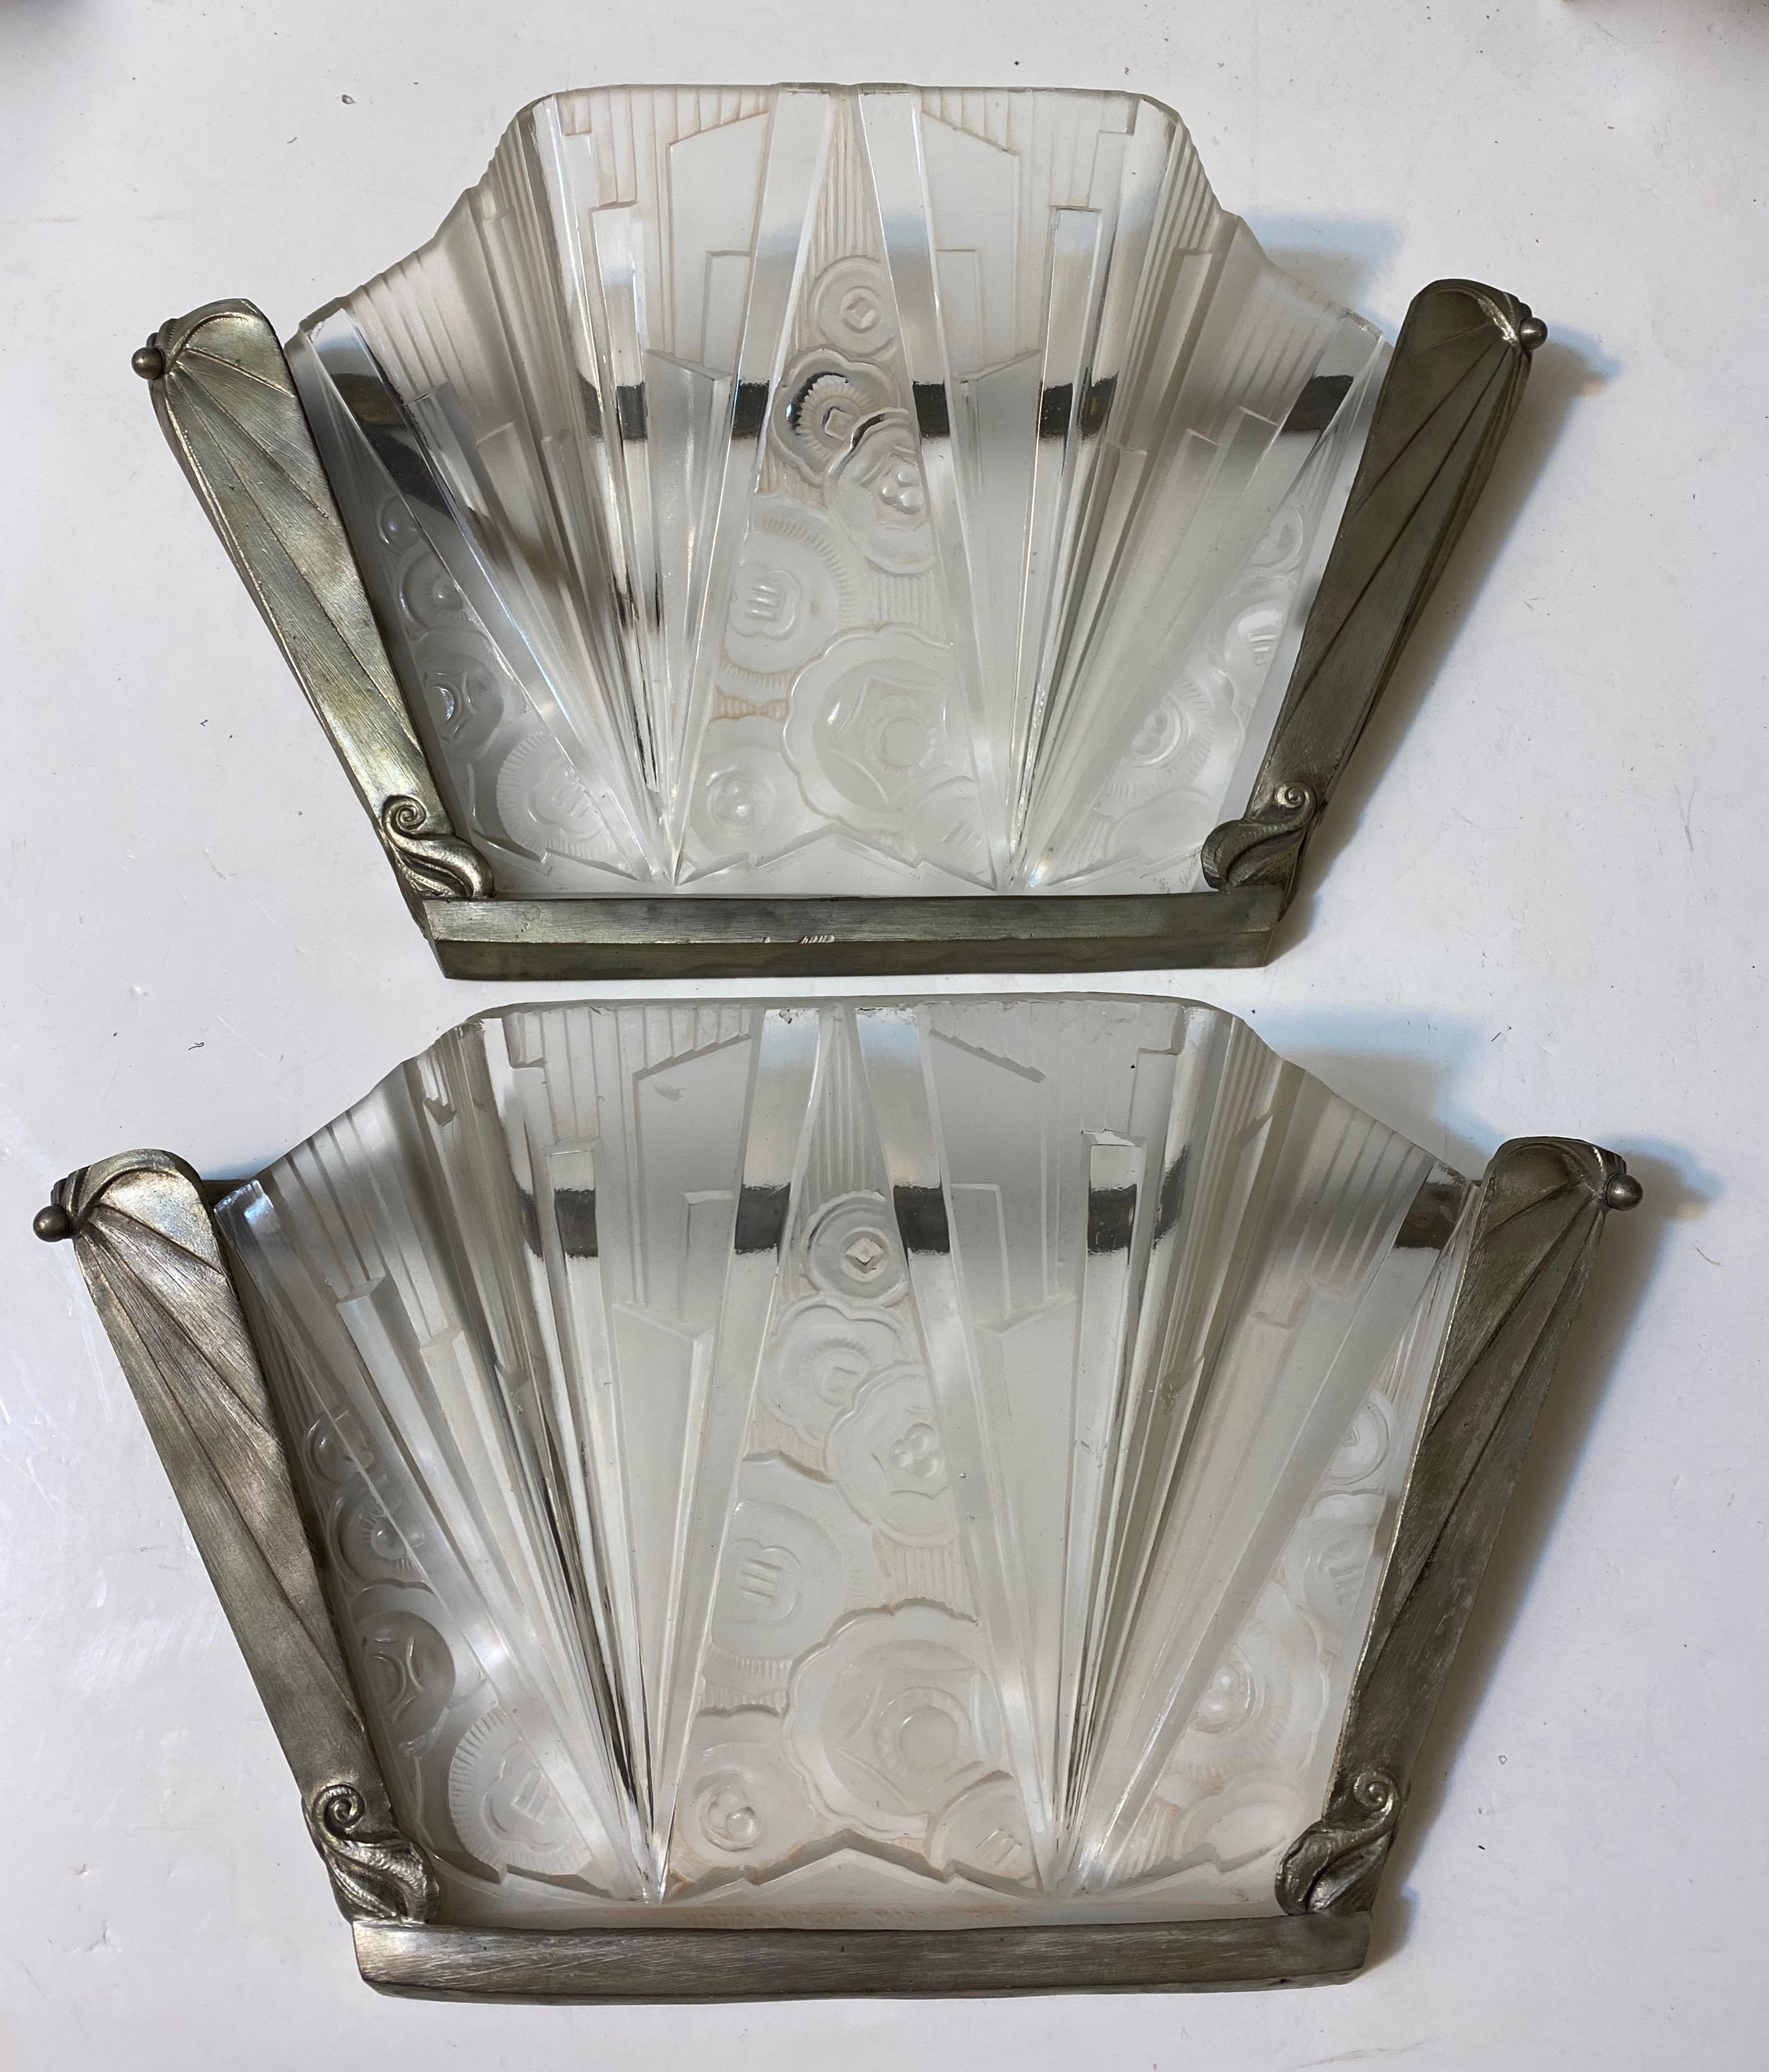 Stunning pair of French Art Deco sconce signed by Hettier Vincent. With clear frosted glass shades having intricate geometric and floral motif details throughout. The shades are held by a matching nickel geometric design frame. Has been rewired for